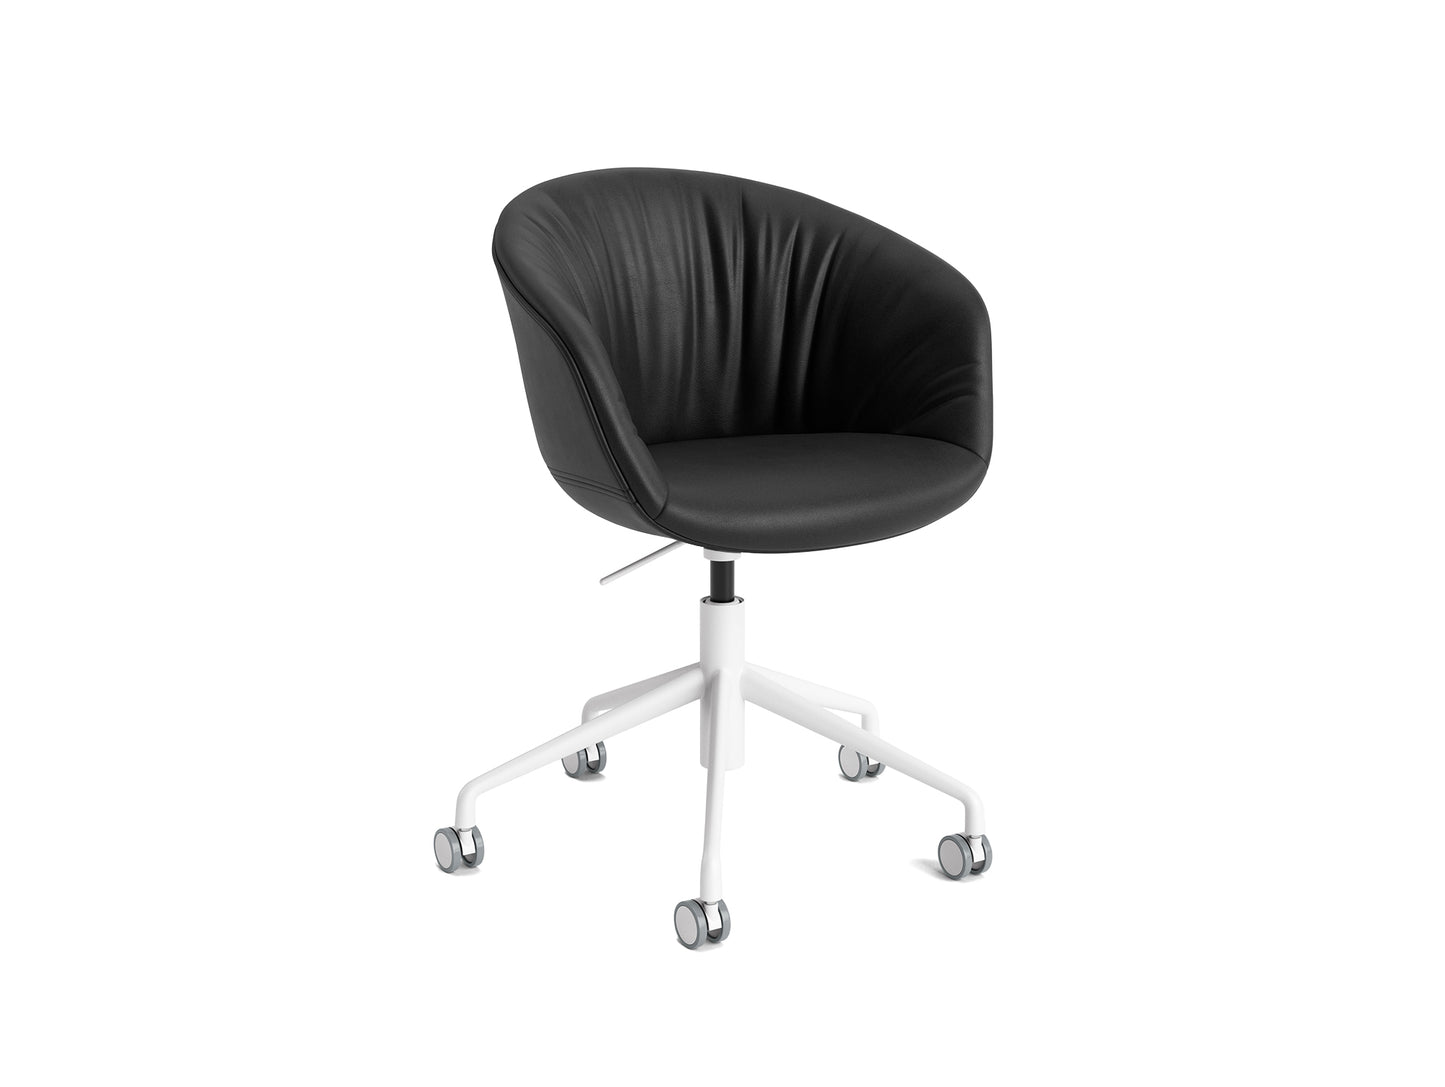 About A Chair AAC 53 Soft by HAY - Nevada 0500 / White Powder Coated Aluminium